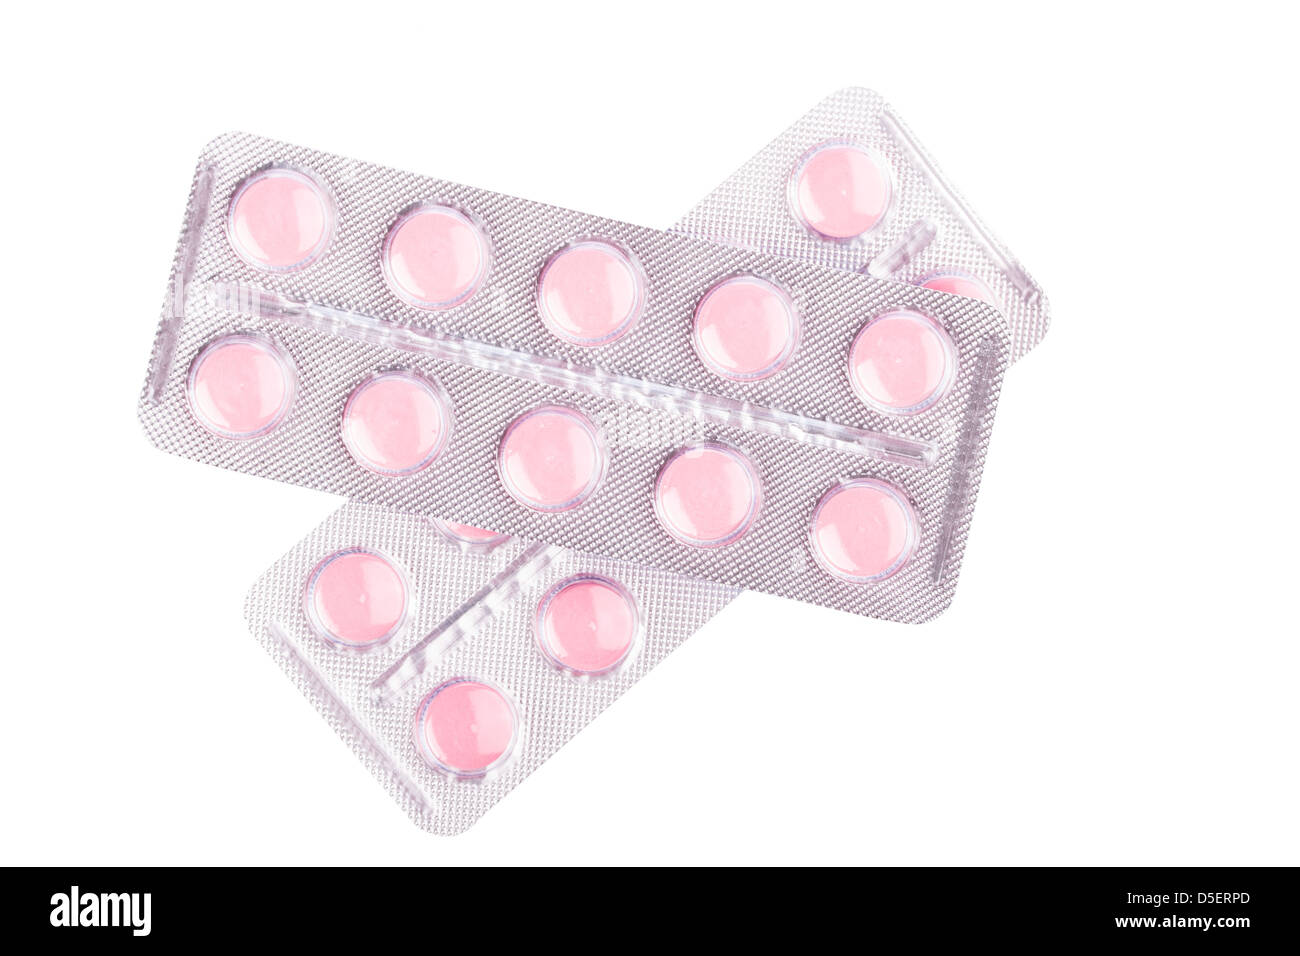 Medical tablets on white background Stock Photo